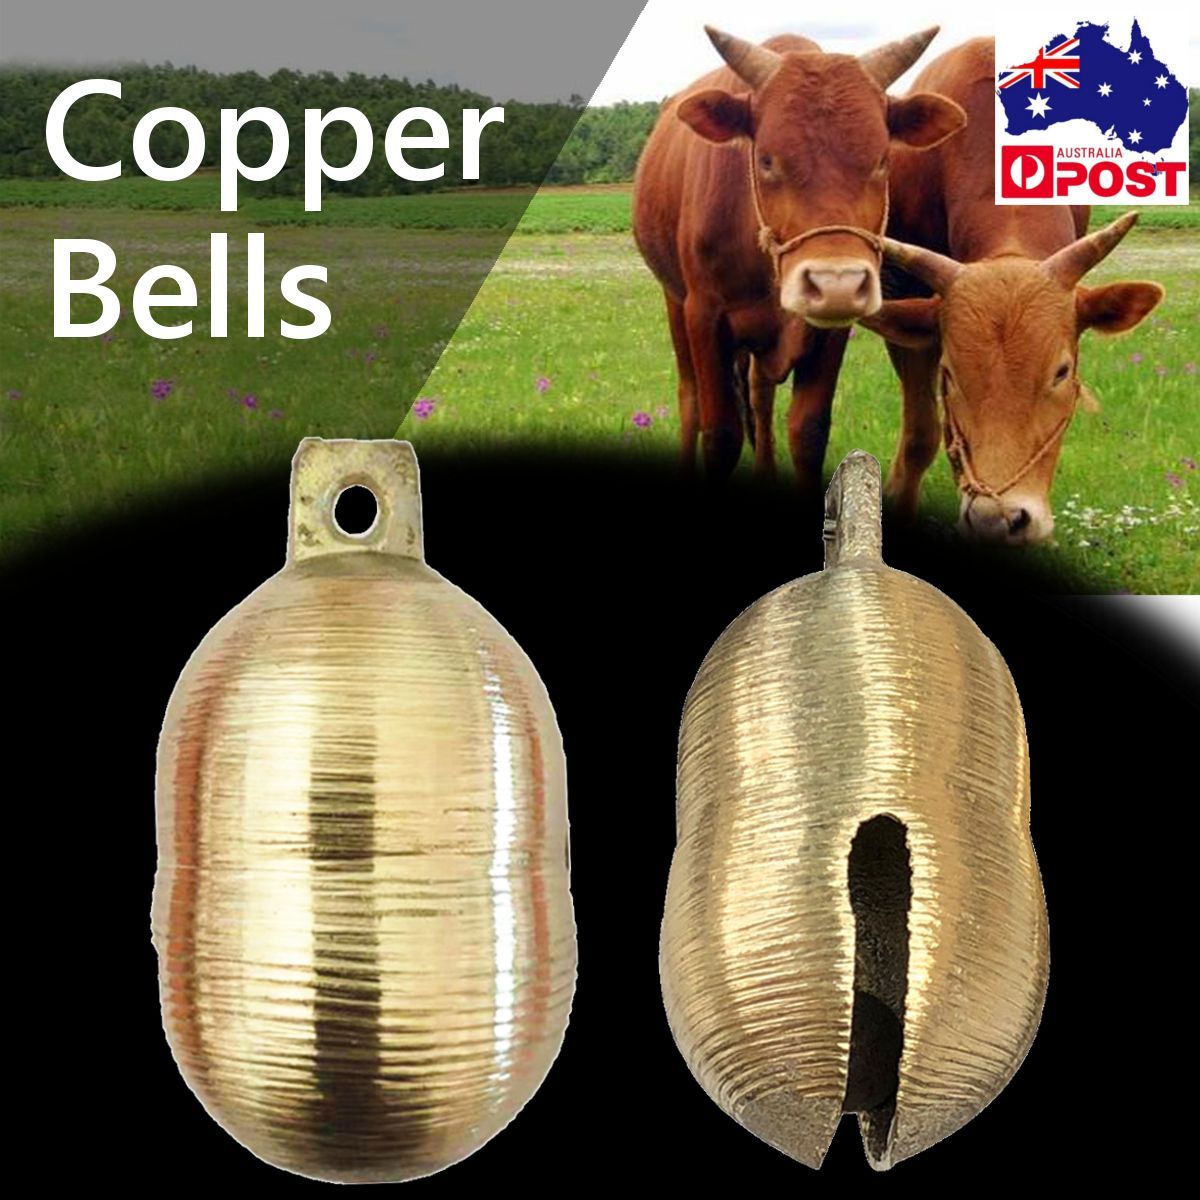 55x33mm-Antique-Super-Loud-Pure-Copper-Bells-Sheep-Dog-Animal-Cattle-Brass-Bell-Decorations-1381101